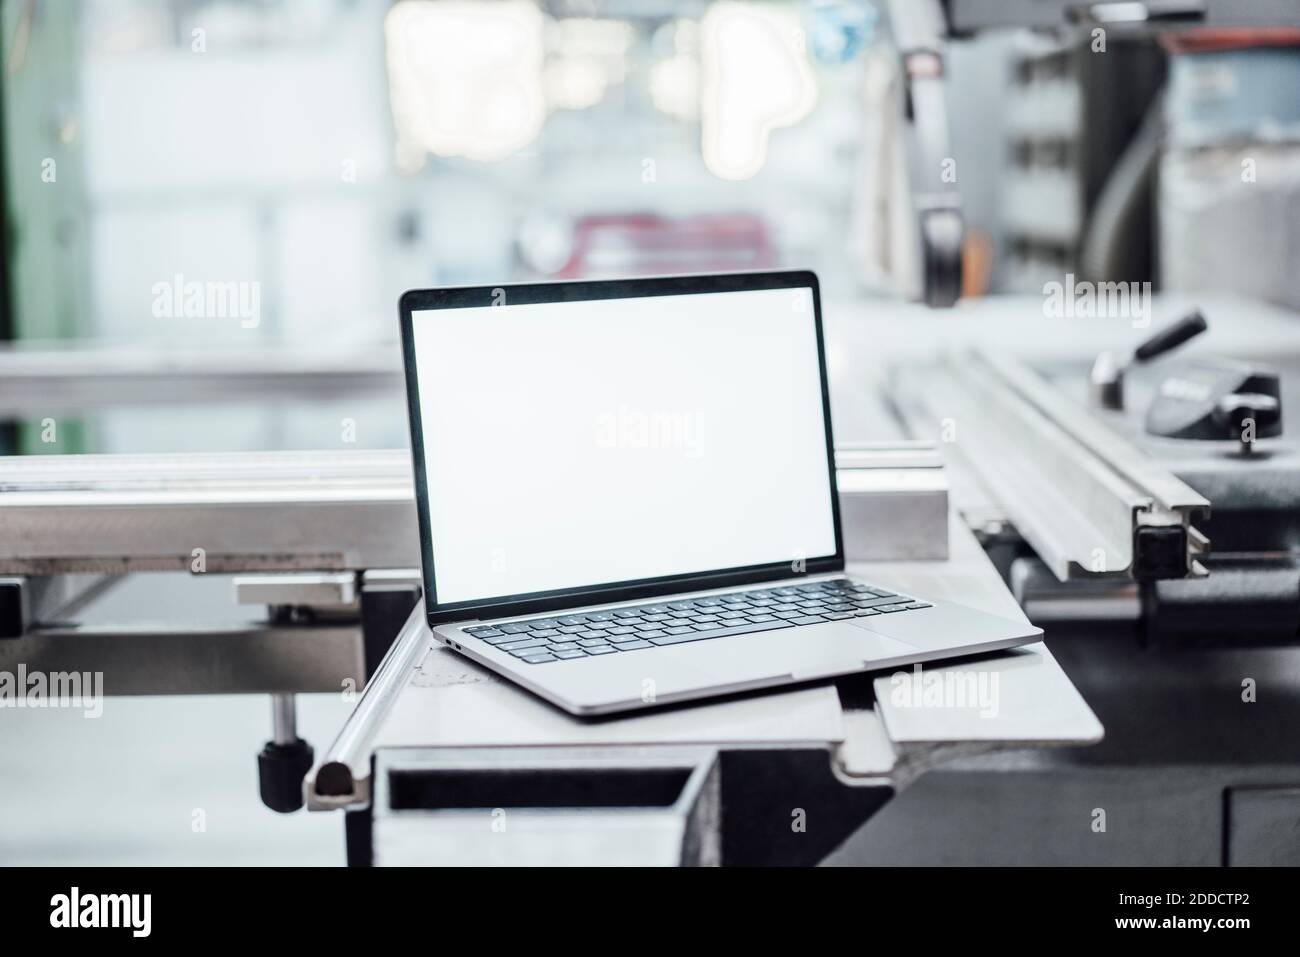 Laptop with blank screen on machinery in factory Stock Photo